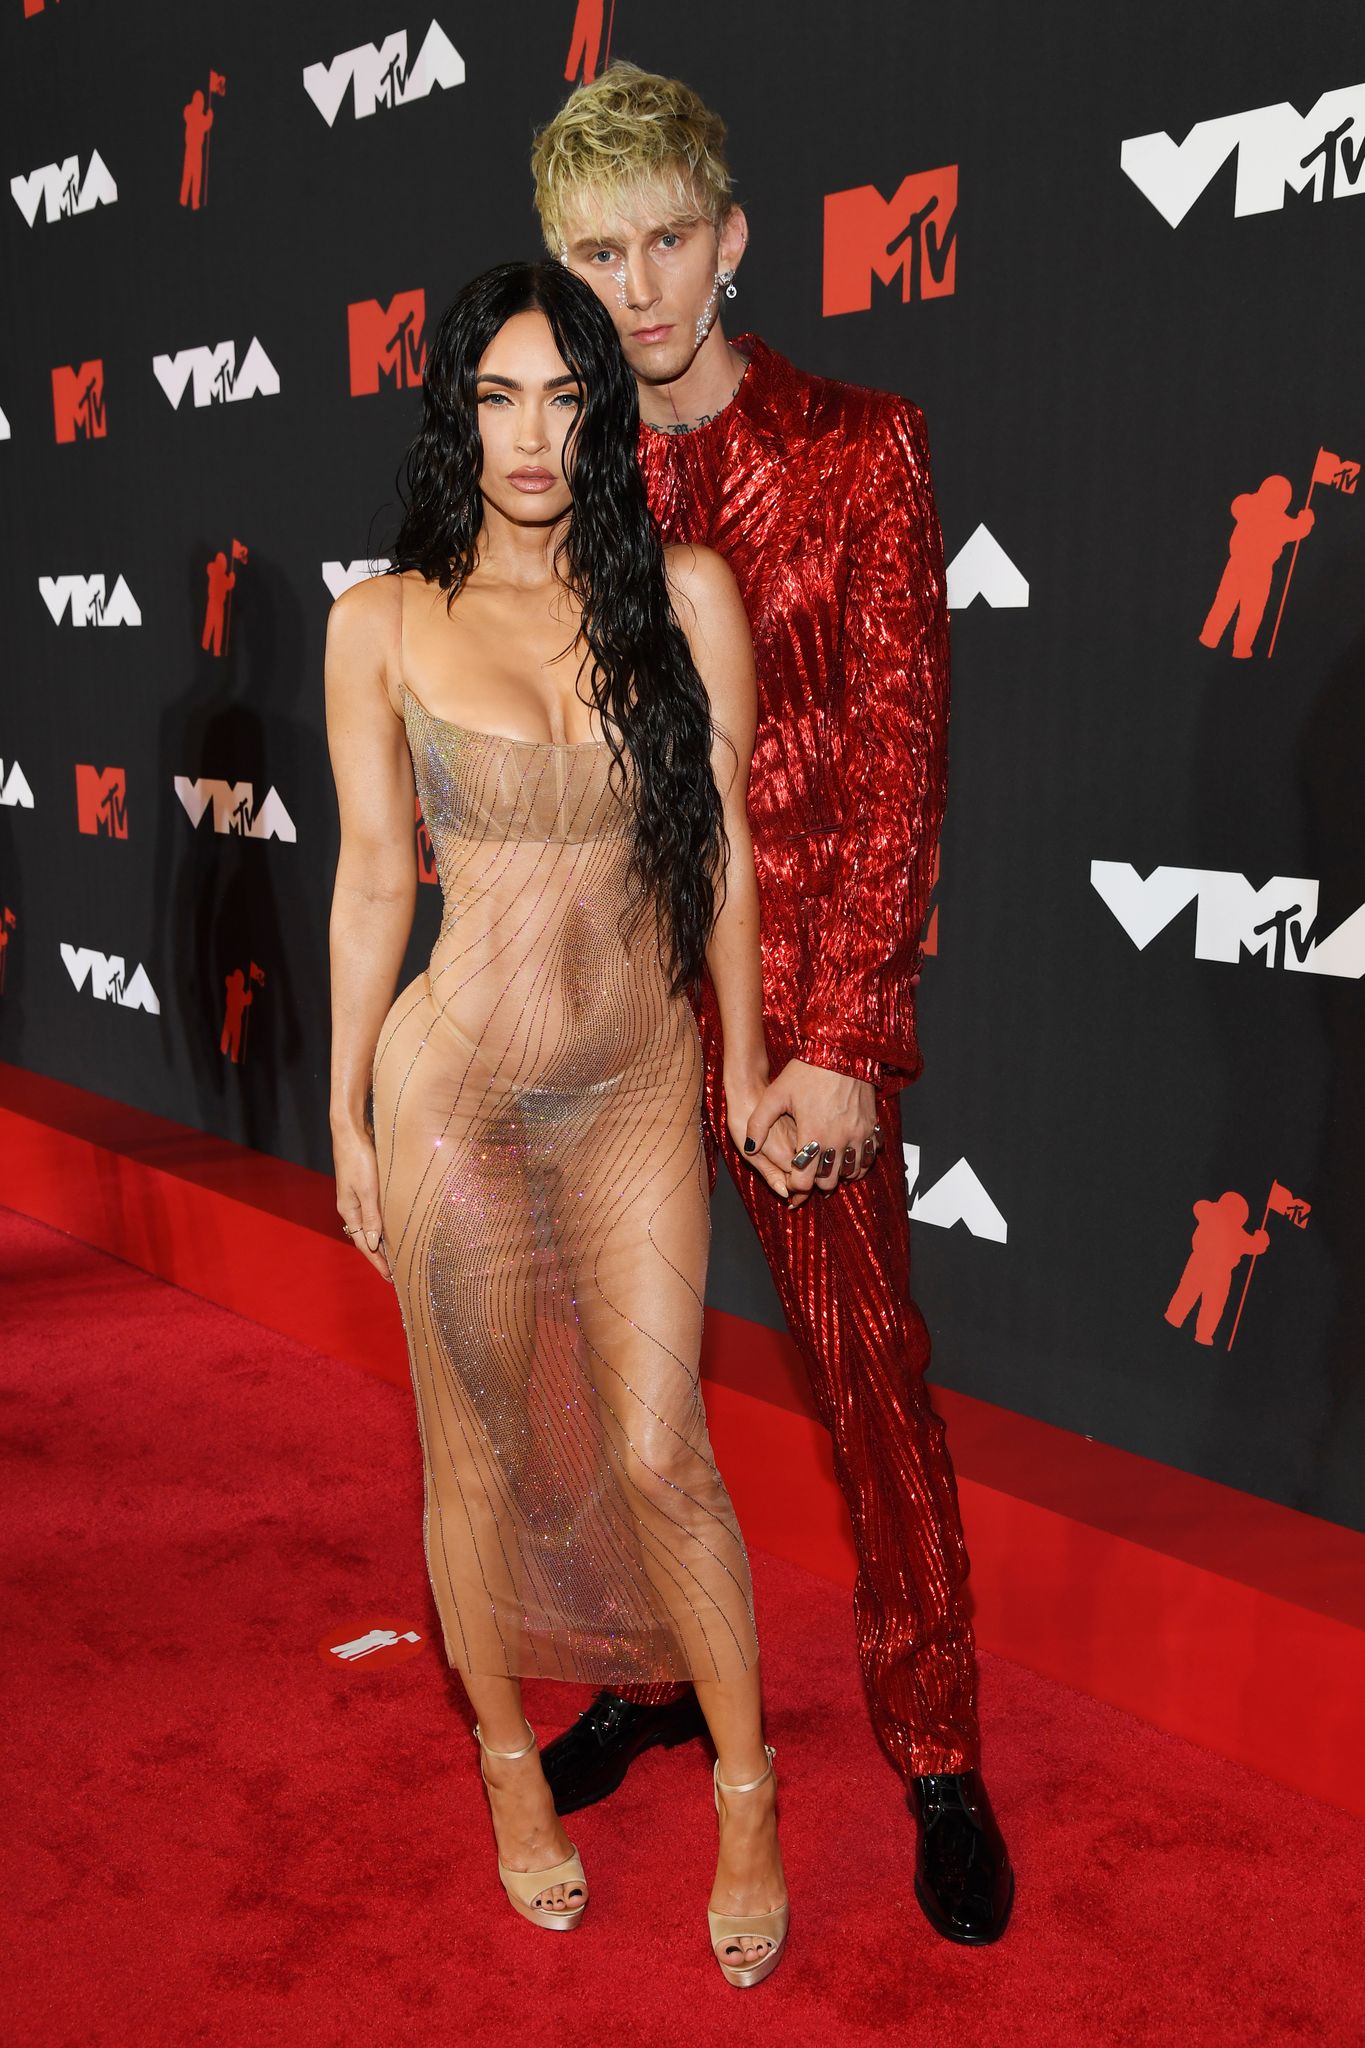 Megan Fox and Machine Gun Kelly during the 2021 MTV Video Music Awards at Barclays Center on September 12, 2021 in the Brooklyn borough of New York City. | Source: Getty Images